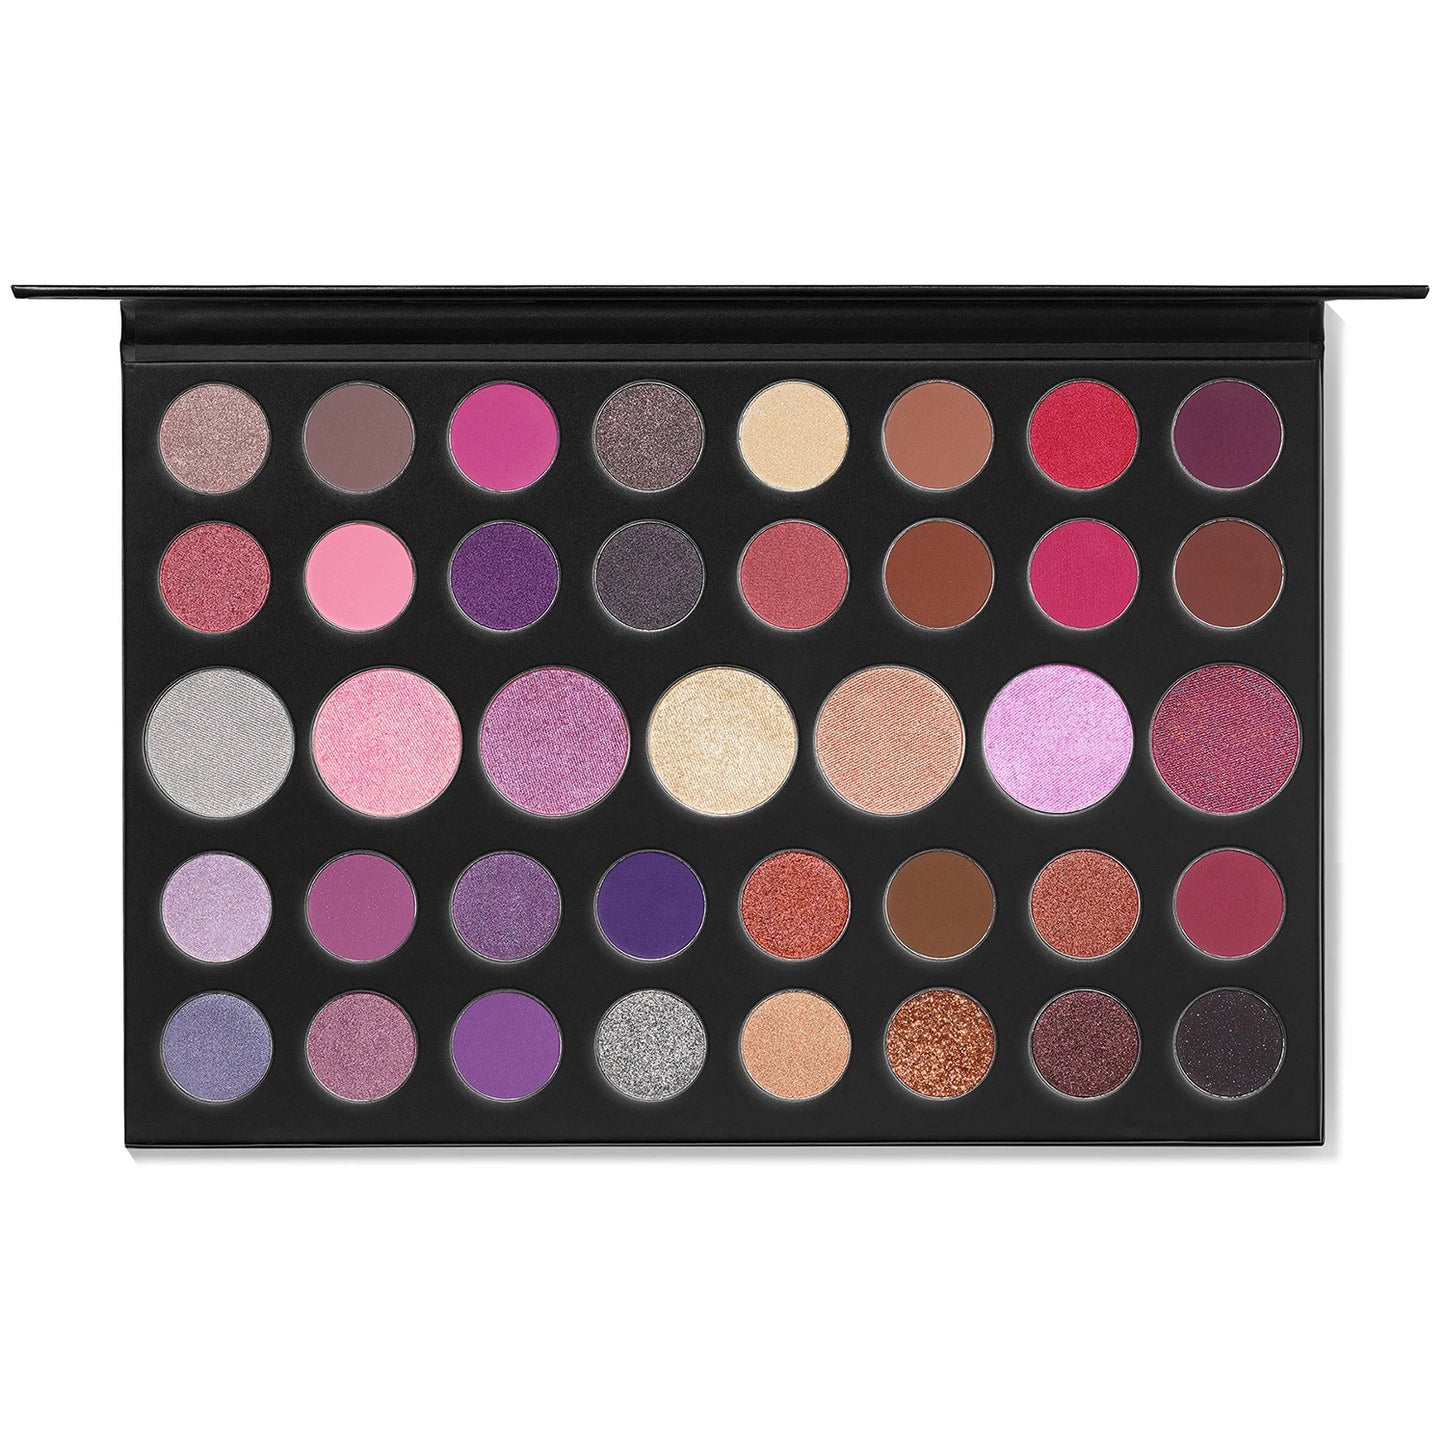 Morphe 39S Such a Gem Artistry Palette. Cash on delivery in karachi, lahore, islamabad, pakistan